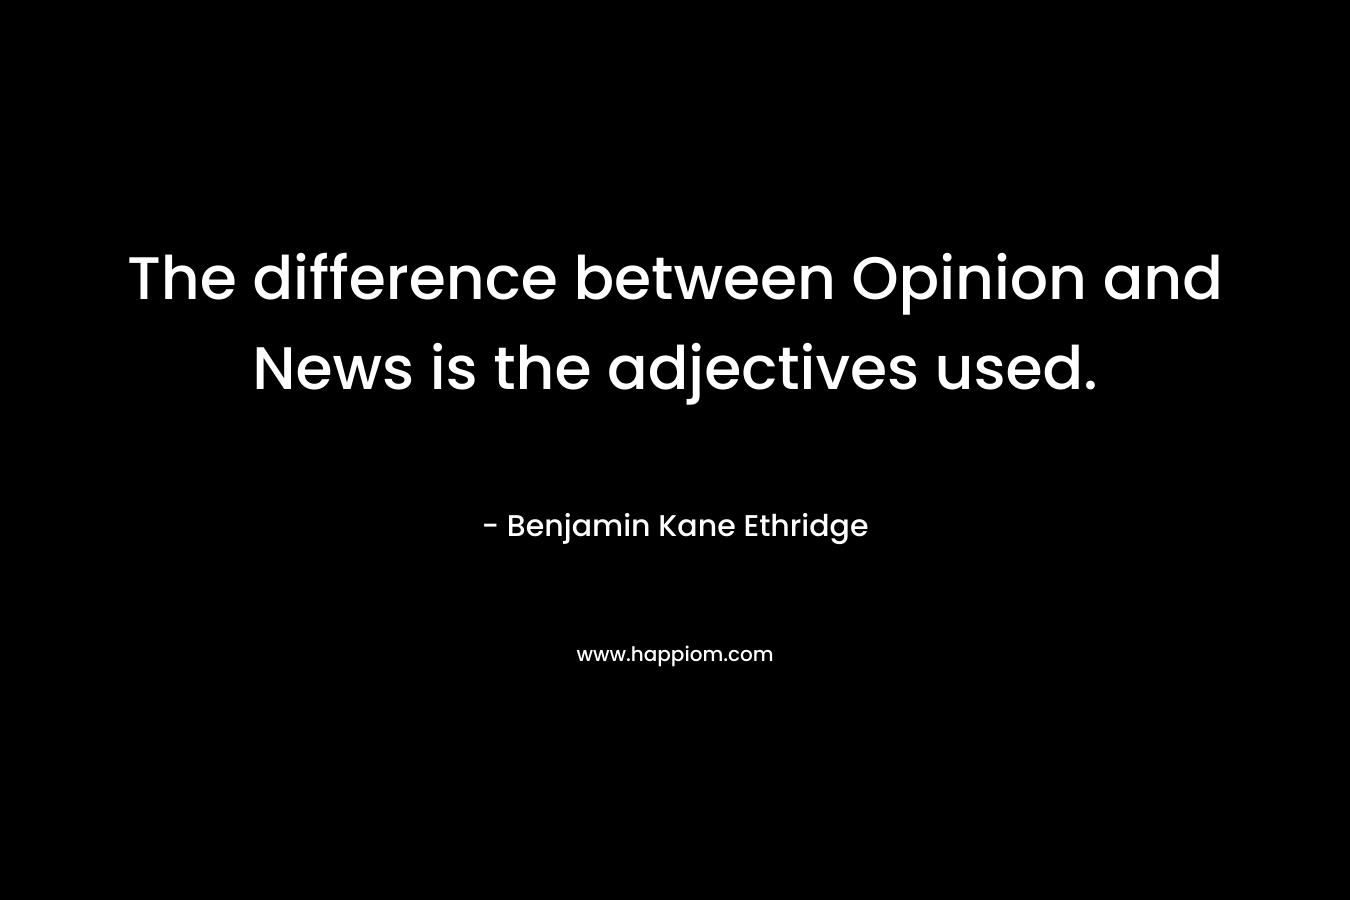 The difference between Opinion and News is the adjectives used.